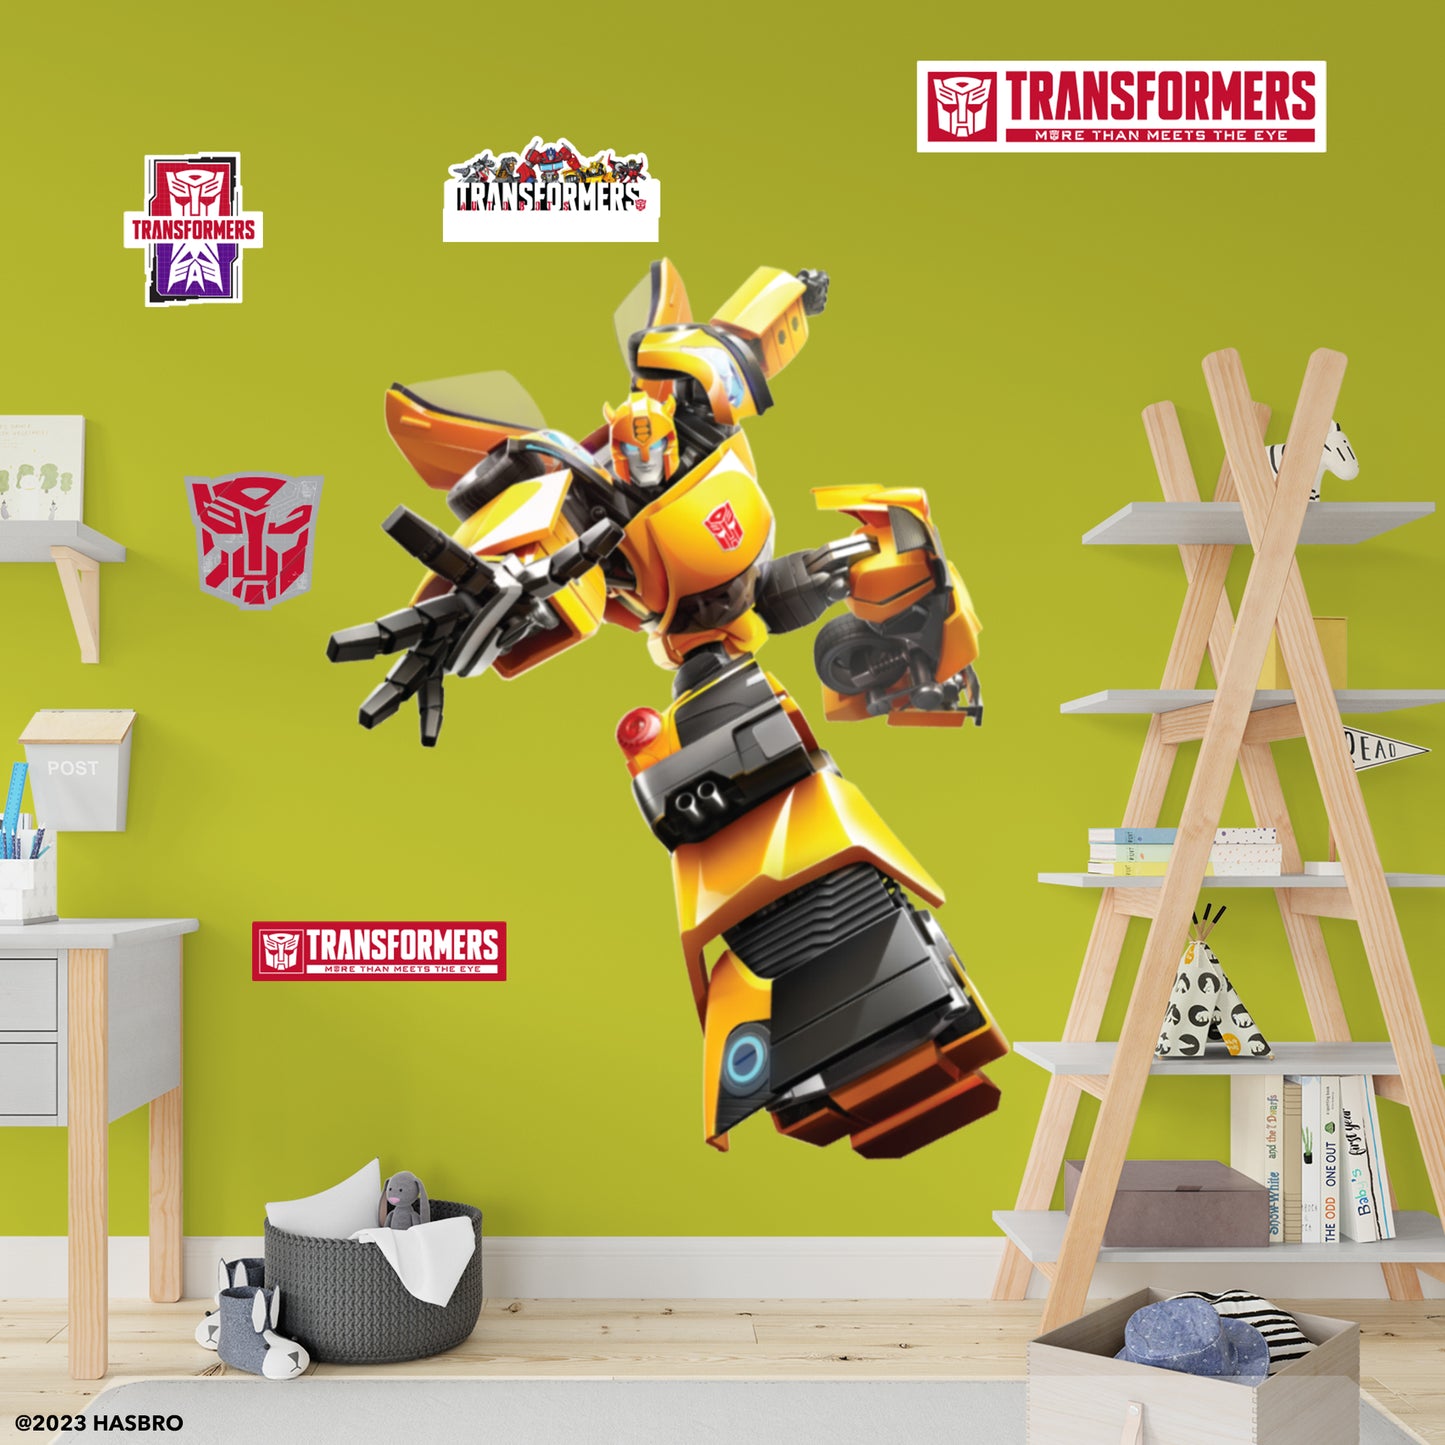 Transformers: Bumblebee RealBig        - Officially Licensed Hasbro Removable     Adhesive Decal